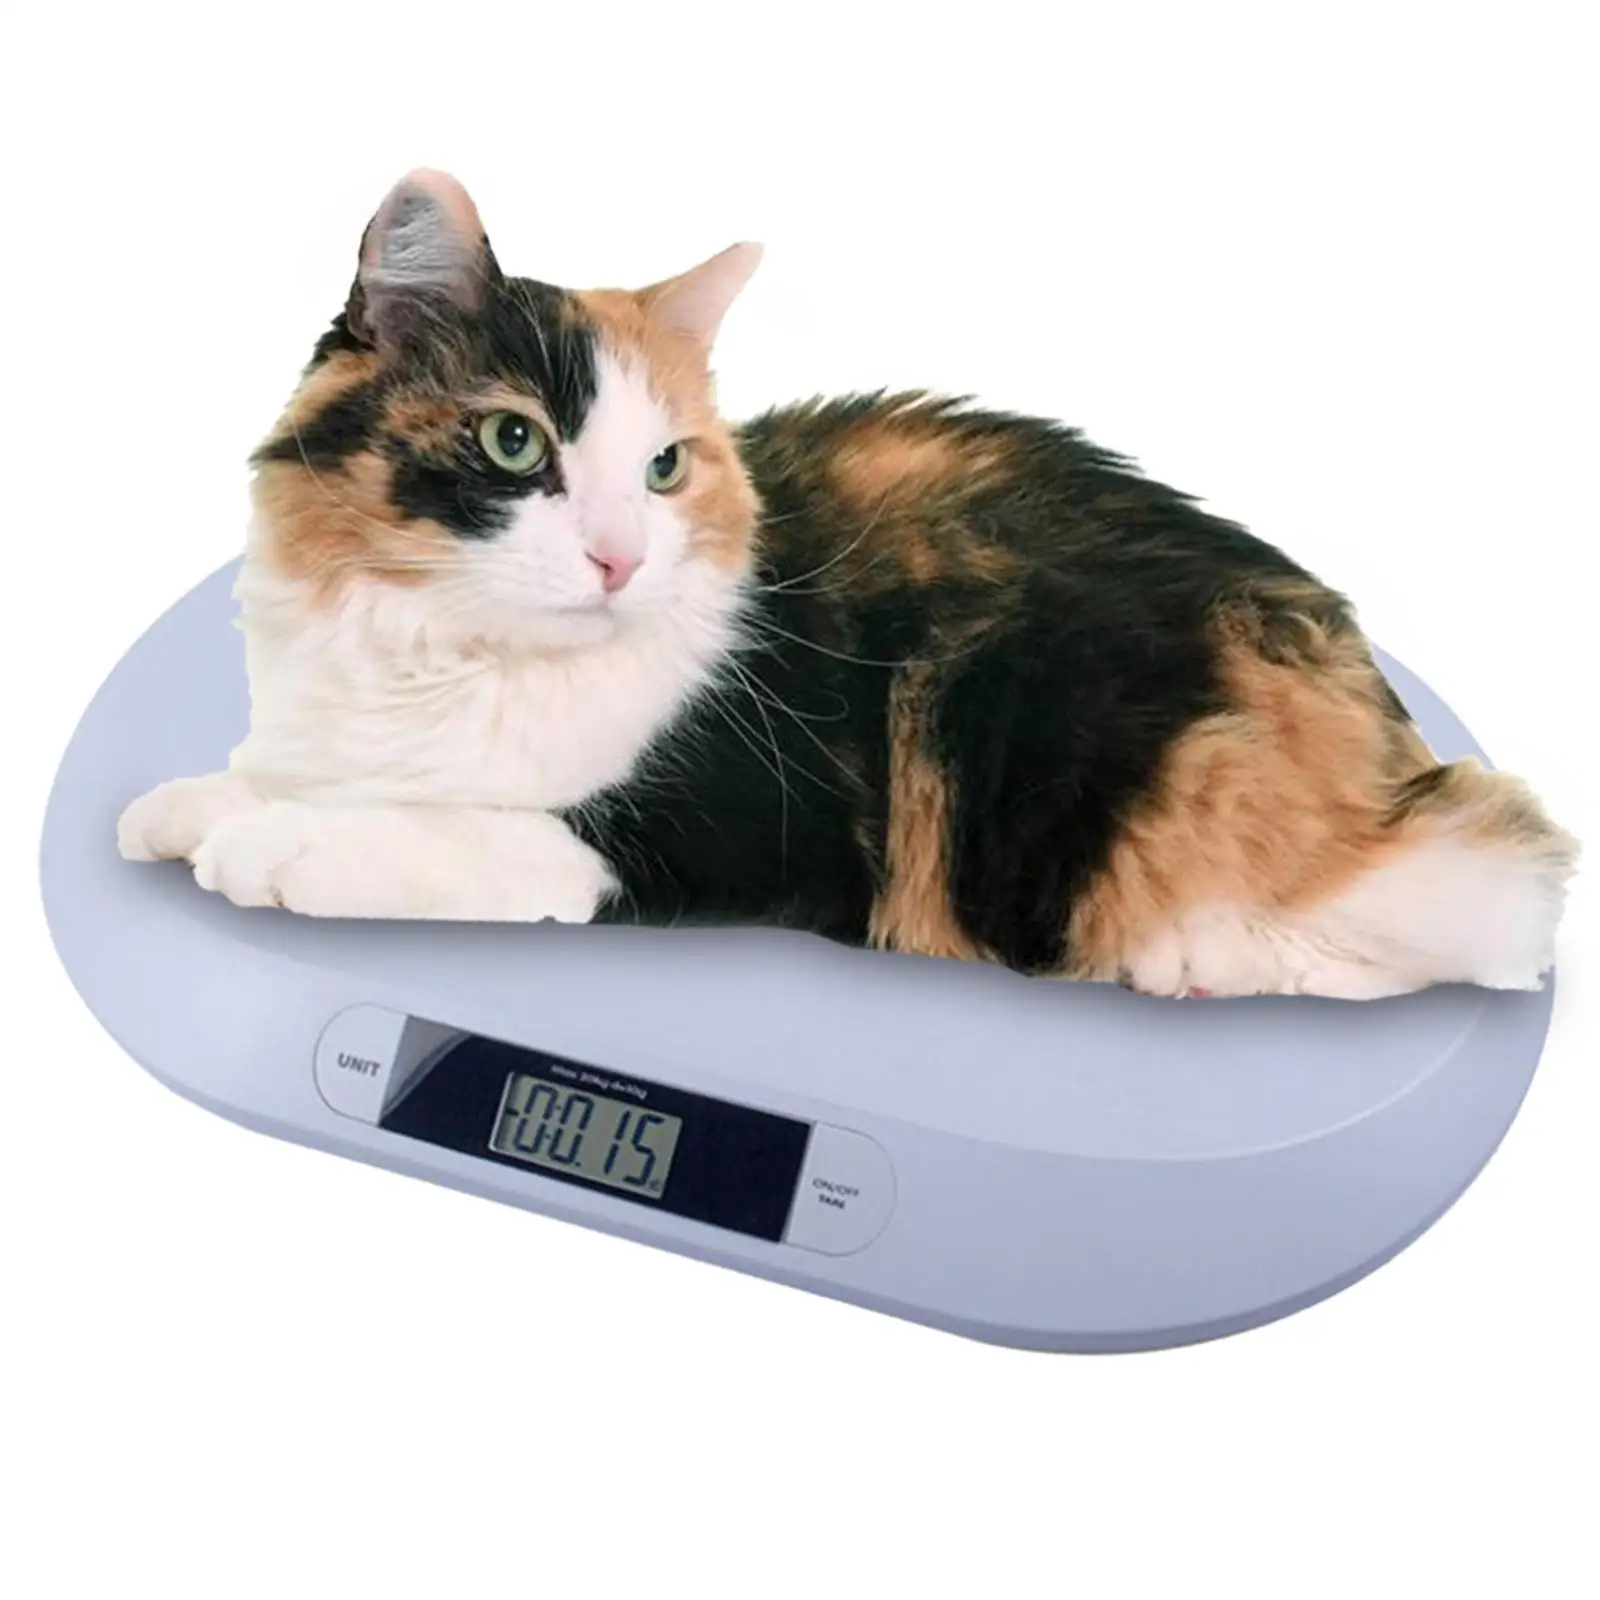 Smart Pet Scale 44.1lb Capacity Accurate Comfort LCD Display Multifunction Weigh Meter for Puppy Newborns Toddlers Infants Cats images - 2